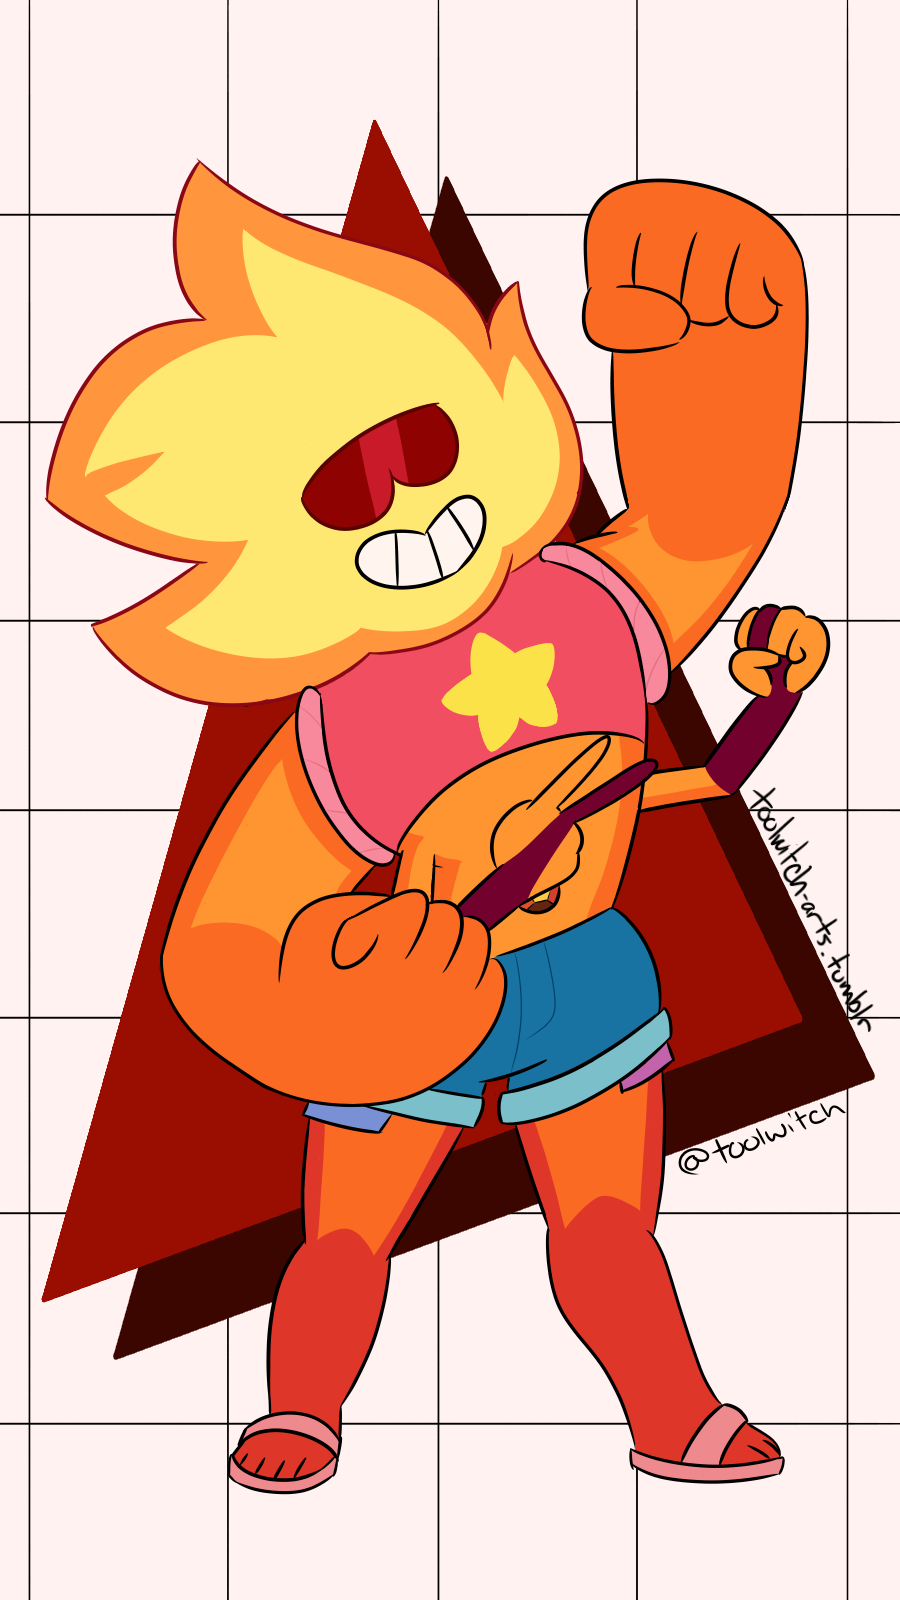 Since I made the Rainbow Quartz phone wallpaper I’ve decided to make one for each of Steven’s fusions. Here’s Sunstone our, frankly underappreciated, giant, walking, 90′s PSA